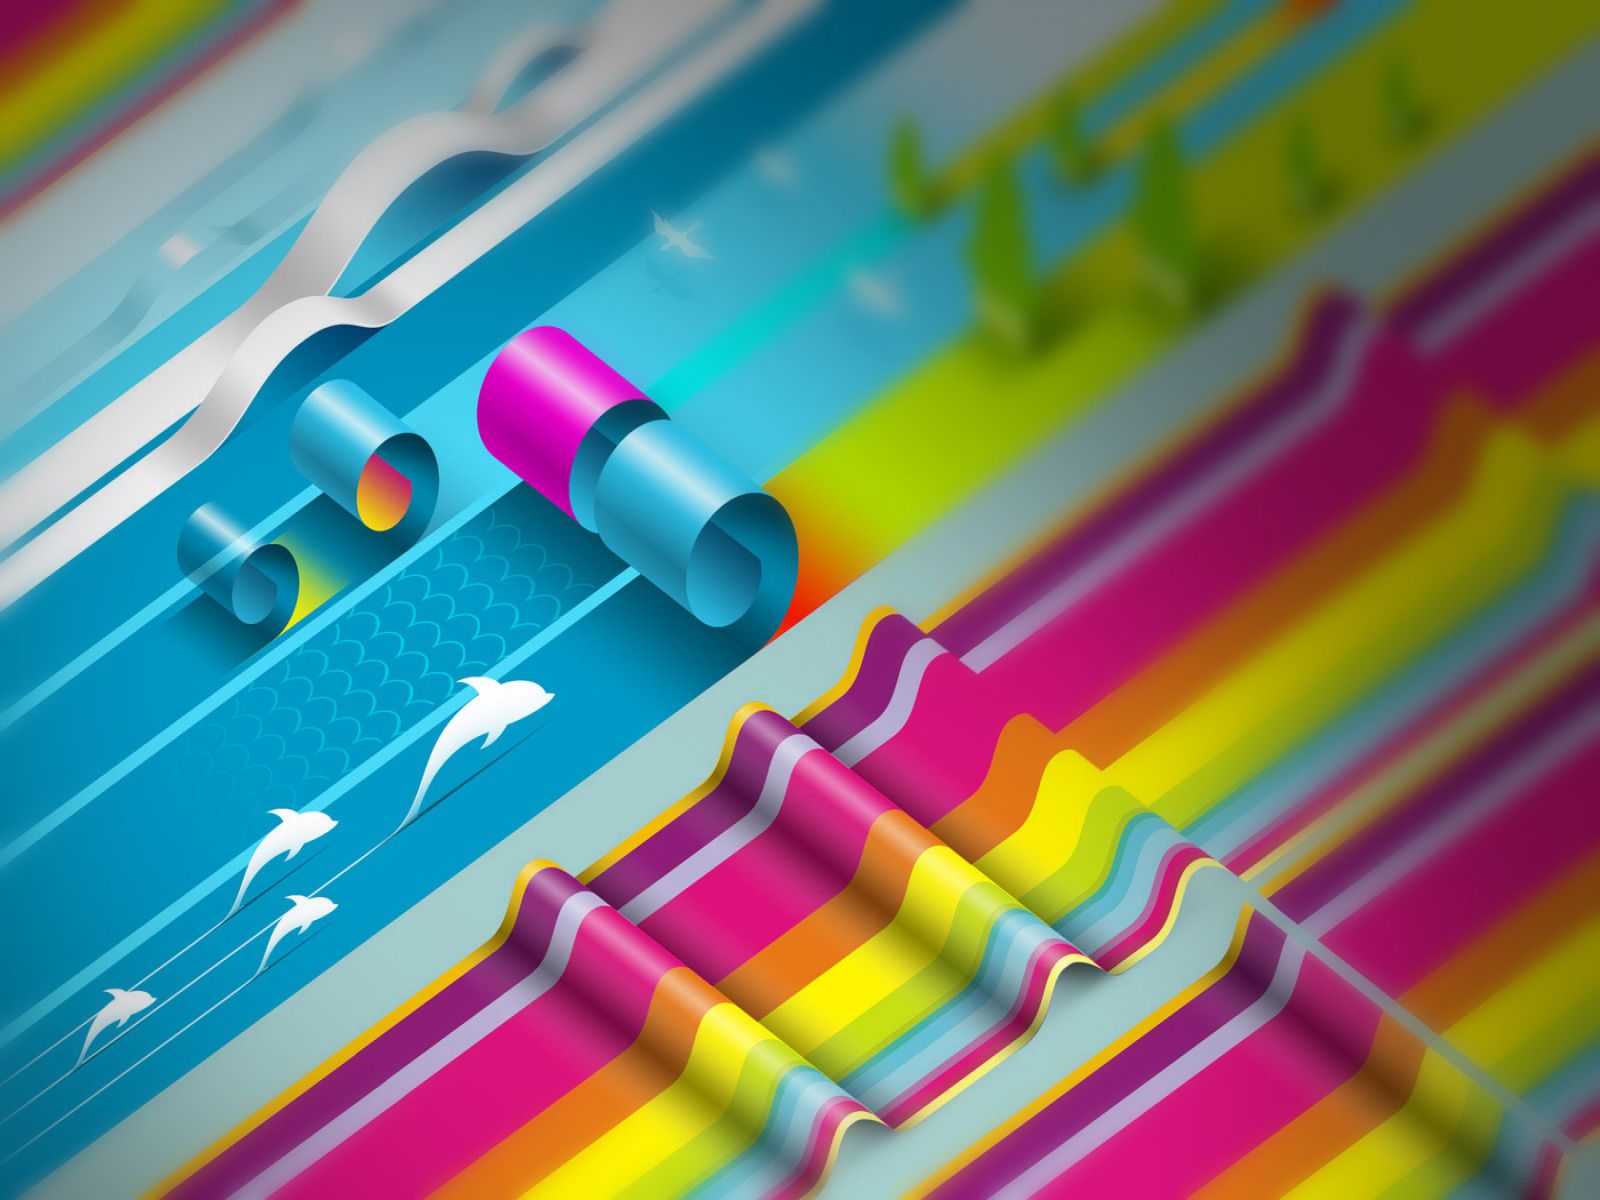 3d Colorful Creative Design Wallpapers - Colorful Hd Wallpapers For Pc - HD Wallpaper 